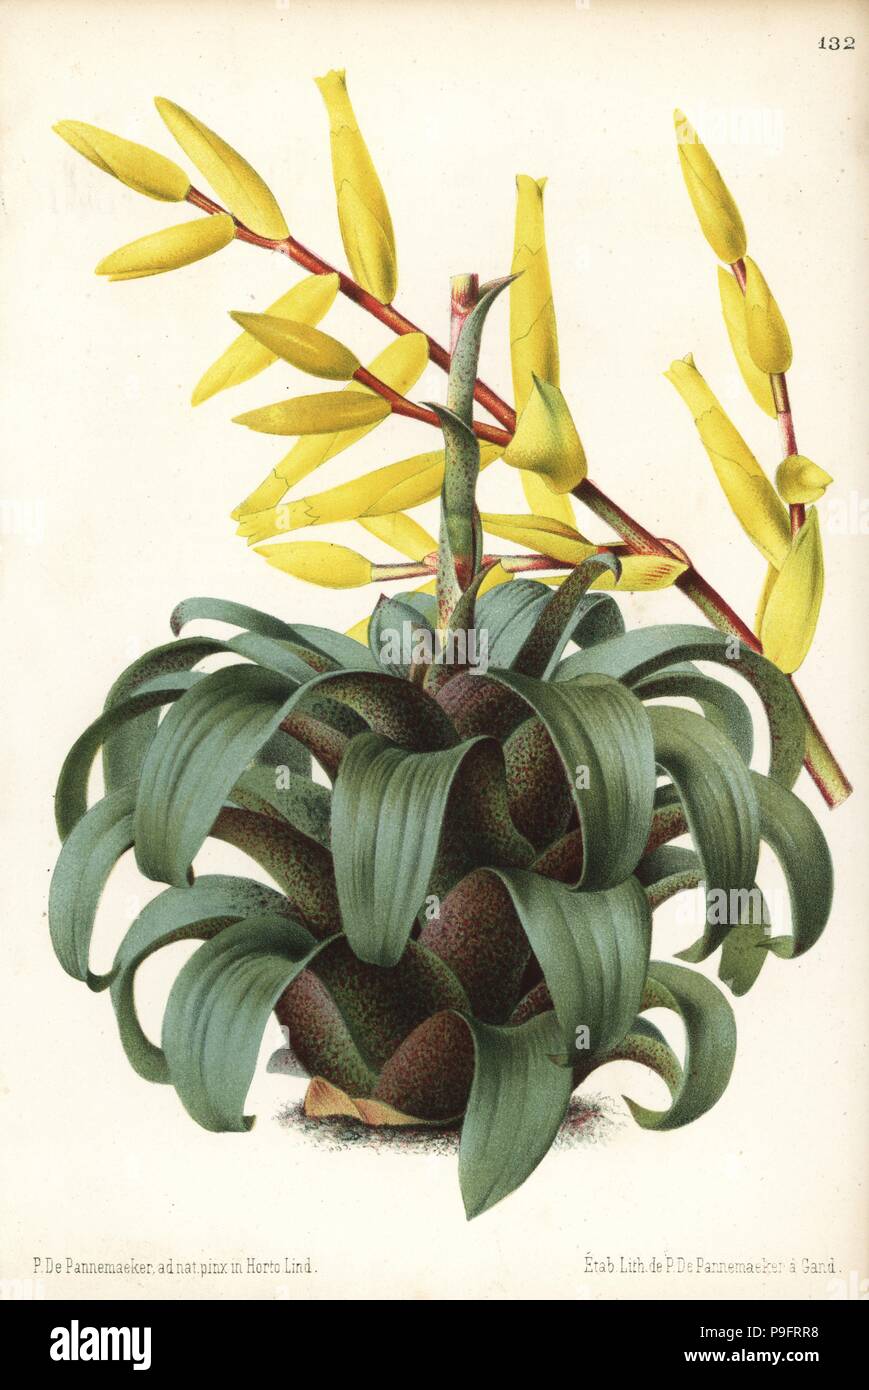 Vriesea saundersii (Encholirion saundersii). Drawn and chromolithographed by P. de Pannemaeker from Jean Linden's l'Illustration Horticole, Brussels, 1873. Stock Photo